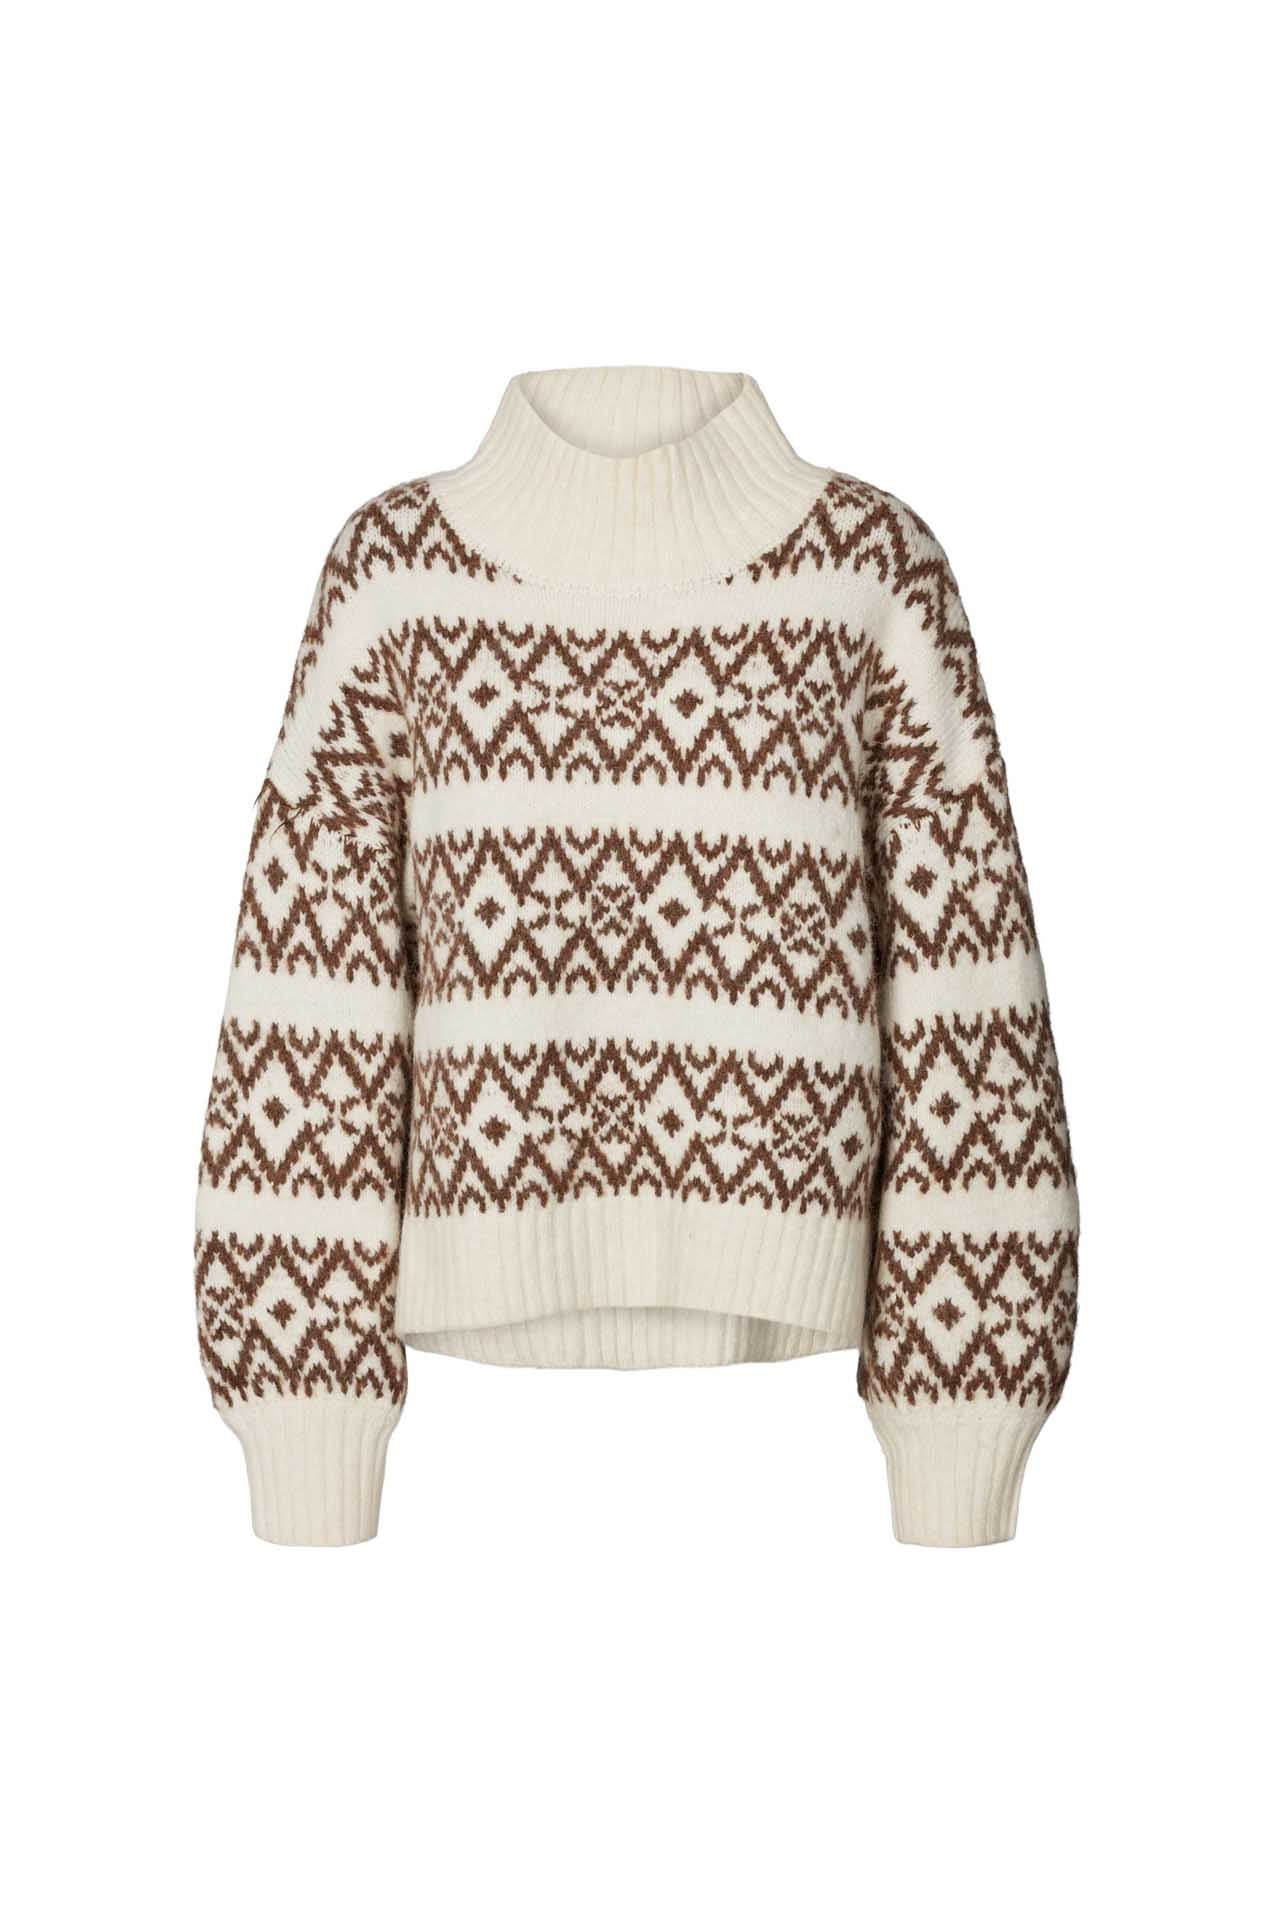 Lollys Laundry Mille Knit Jumper 02 Creme